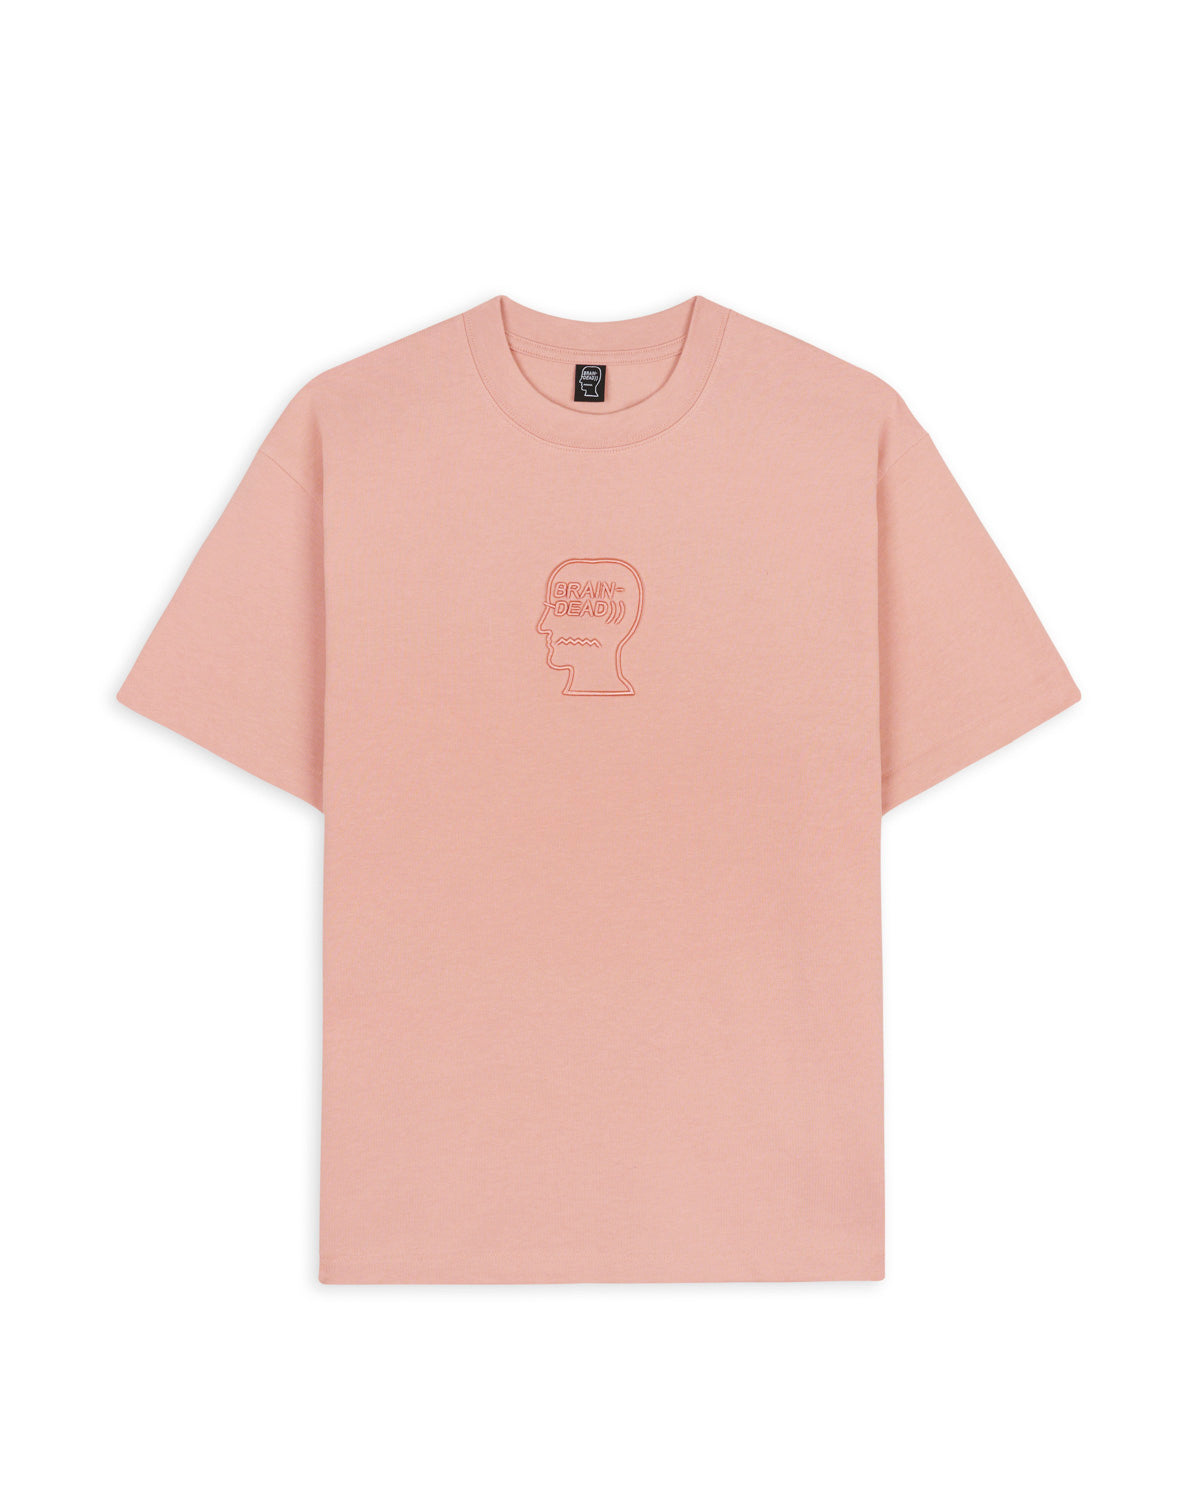 3D Embroidered Logohead Heavy Weight T-Shirt - Peach